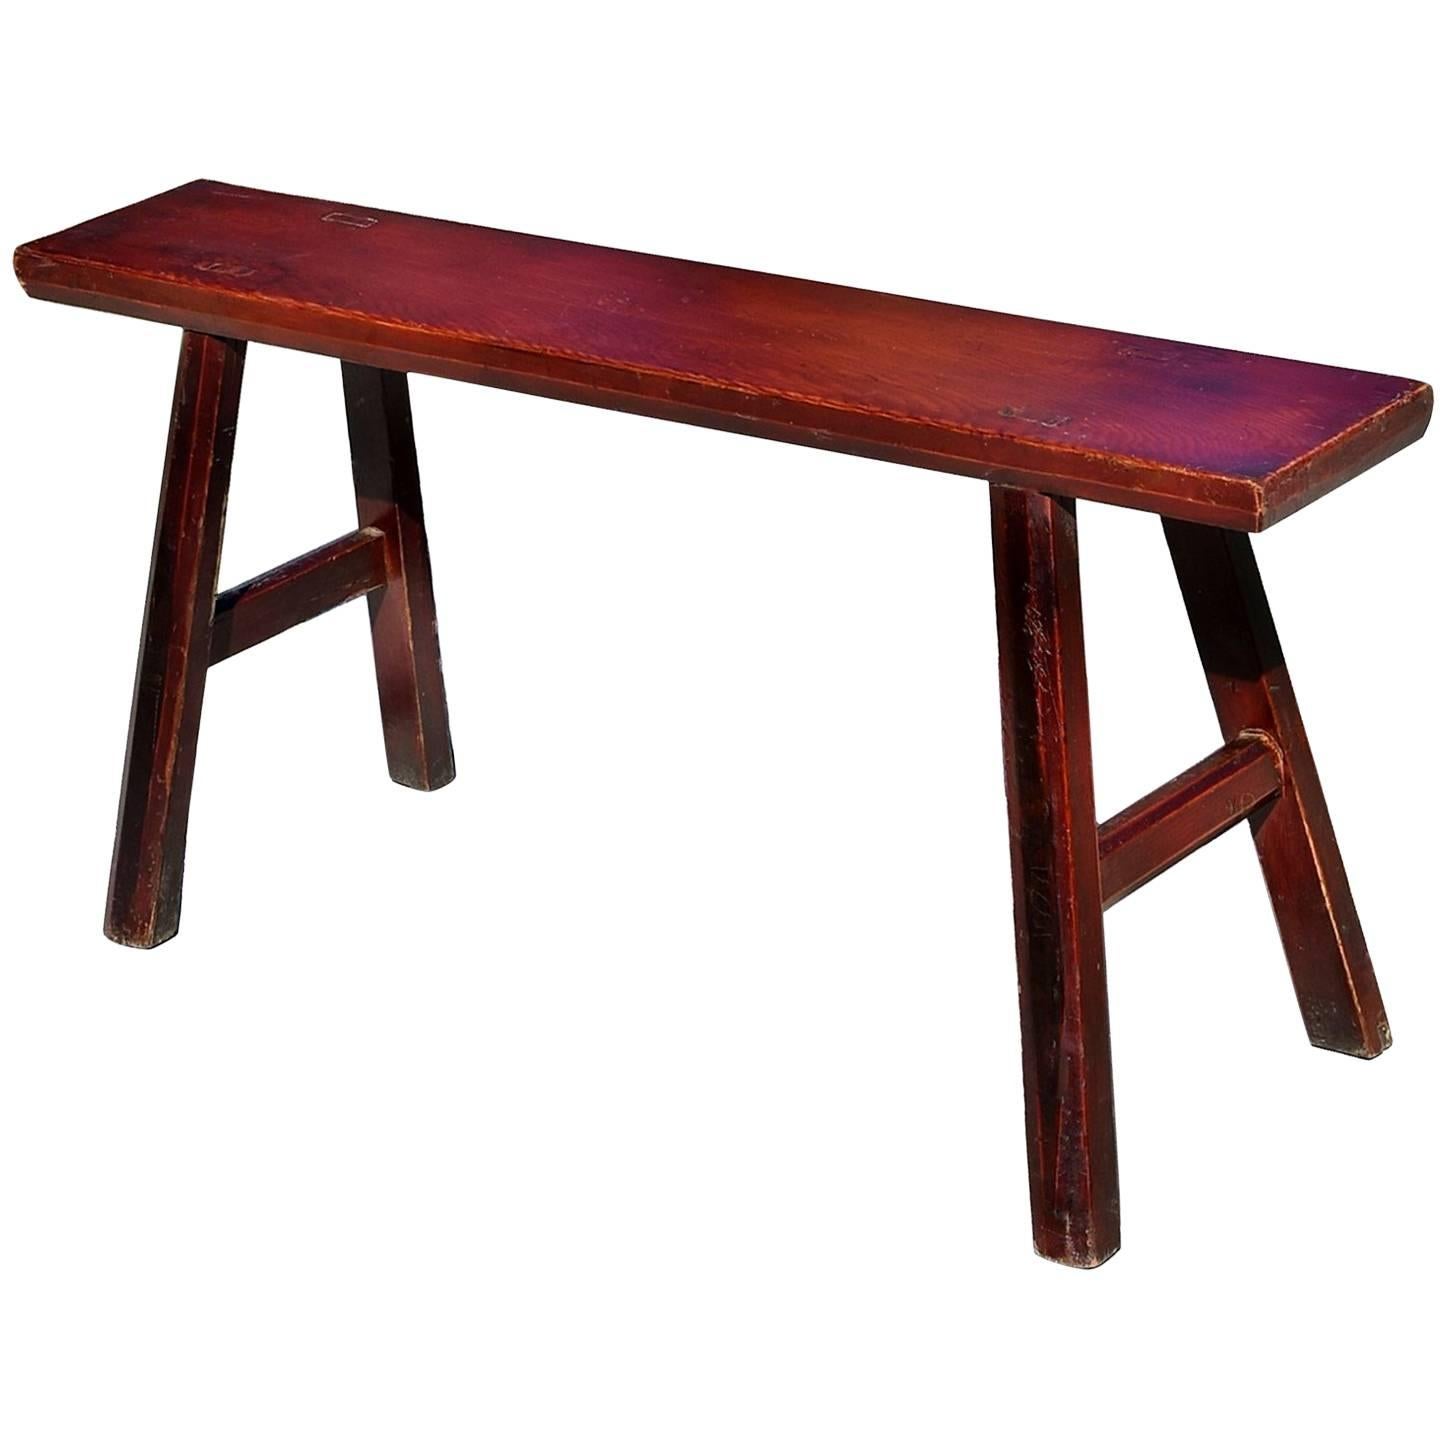 Antique Chinese Bench, Solid Wood, Reddish Brown